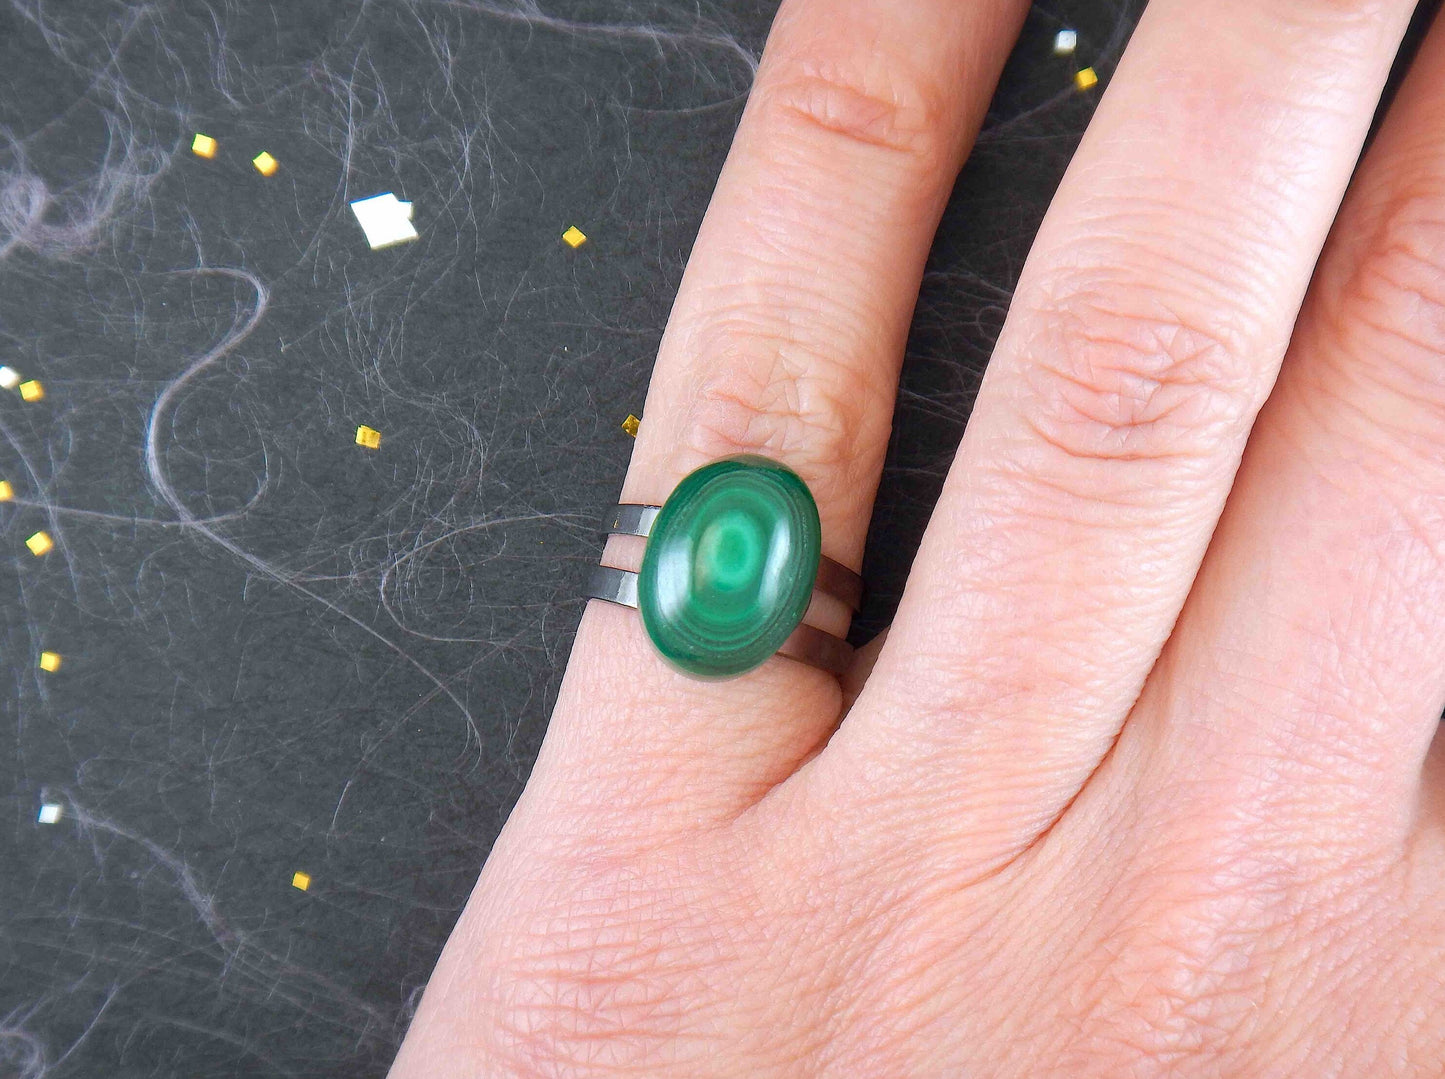 Finger ring with small oval malachite stone cabochon, concentric dark and light green rings, black nickel metal adjustable base (US 5-6)